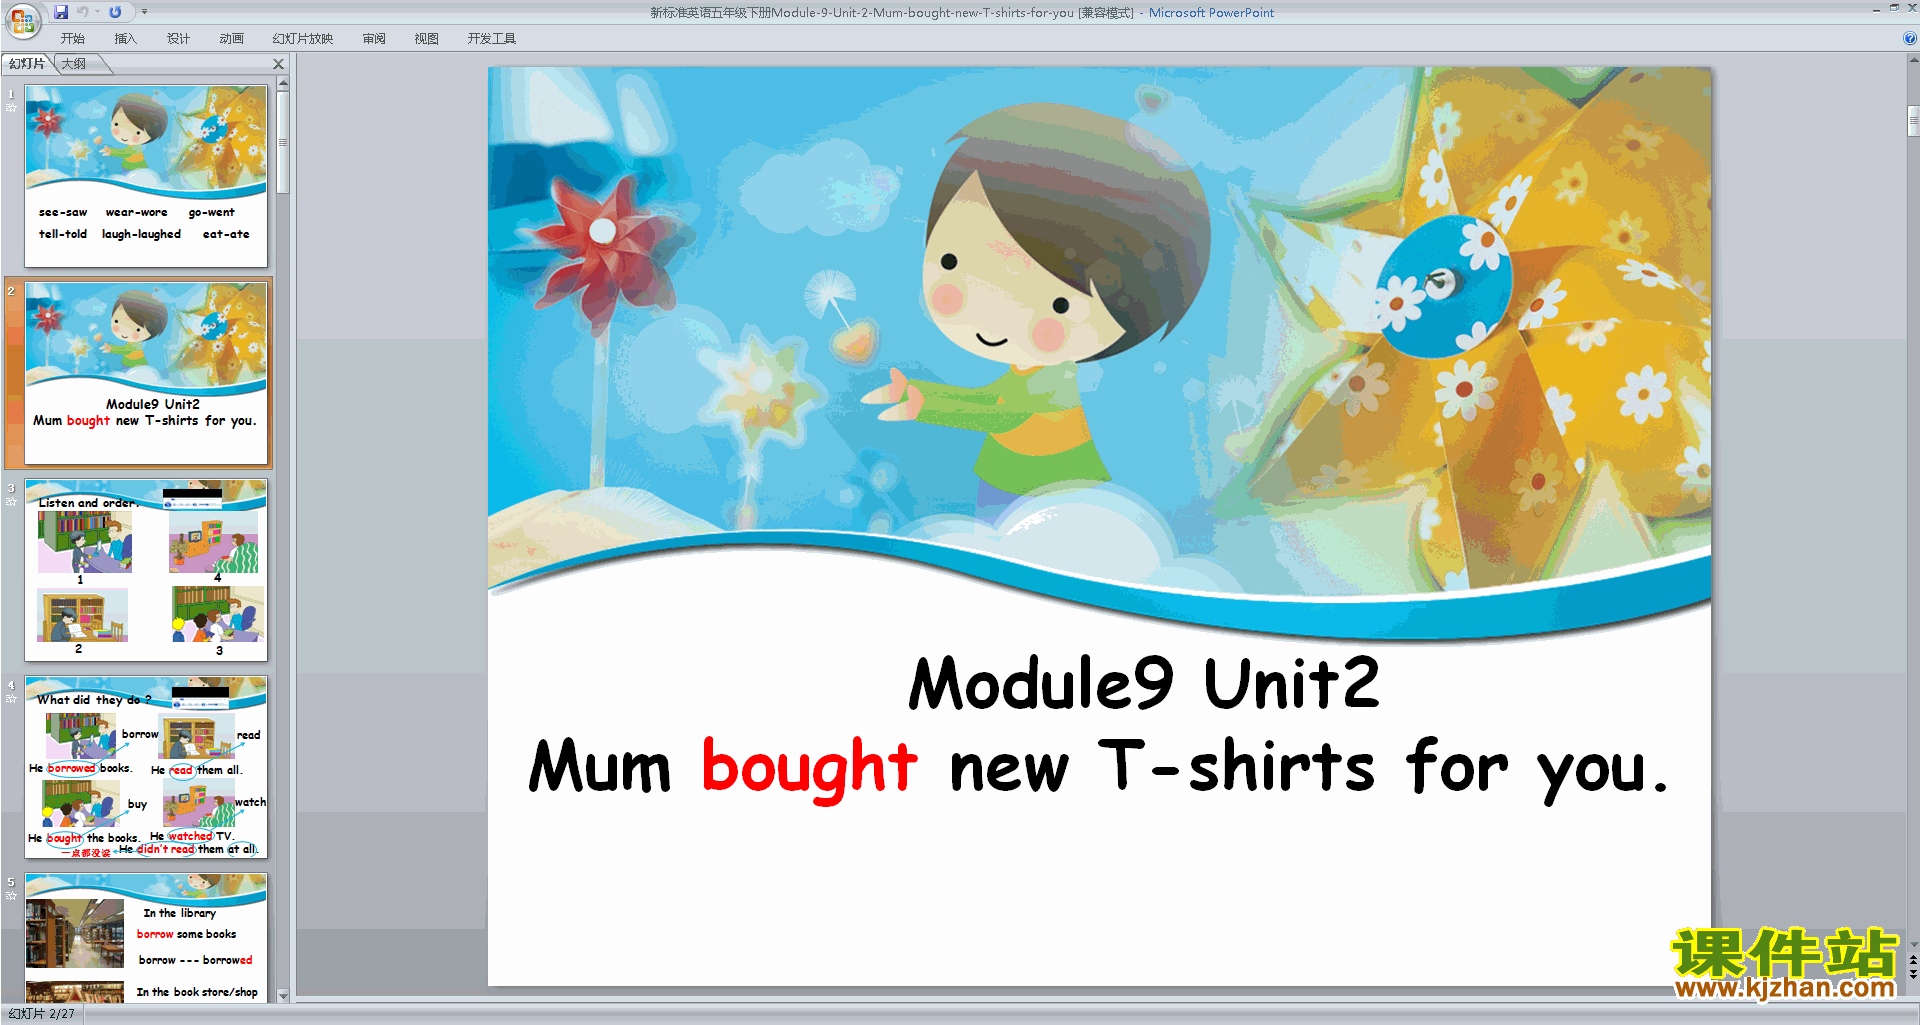 пModule9 Mum bought new T-shirts for youpptμ